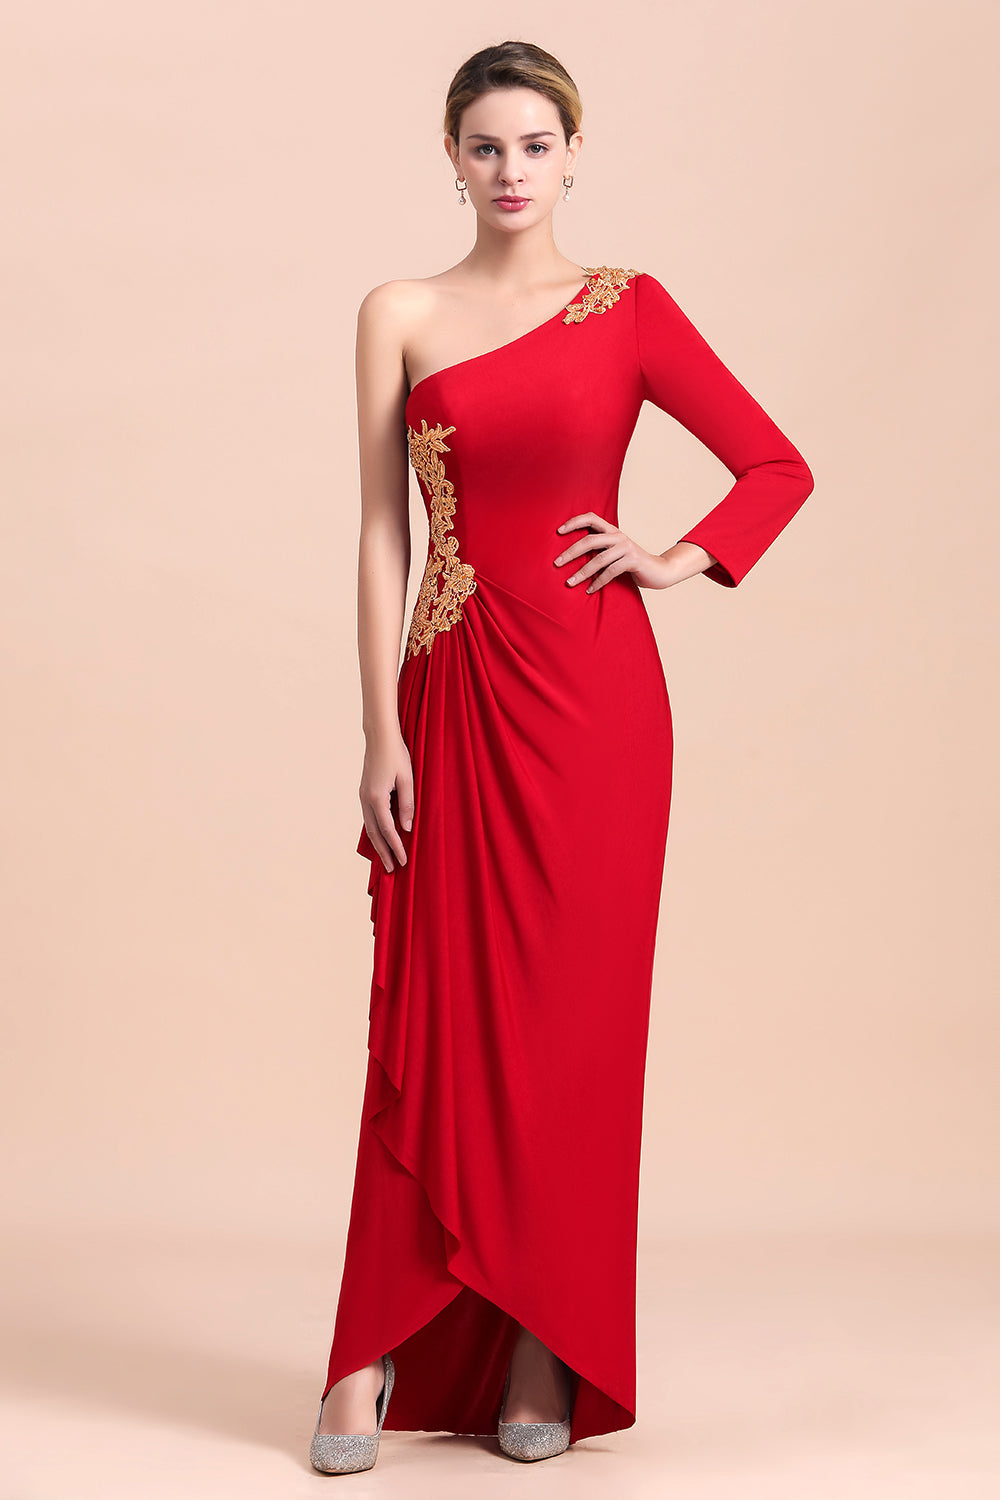 Chic One-Shoulder Long Sleeves Ruffle Mother of Bride Dresses with Appliques